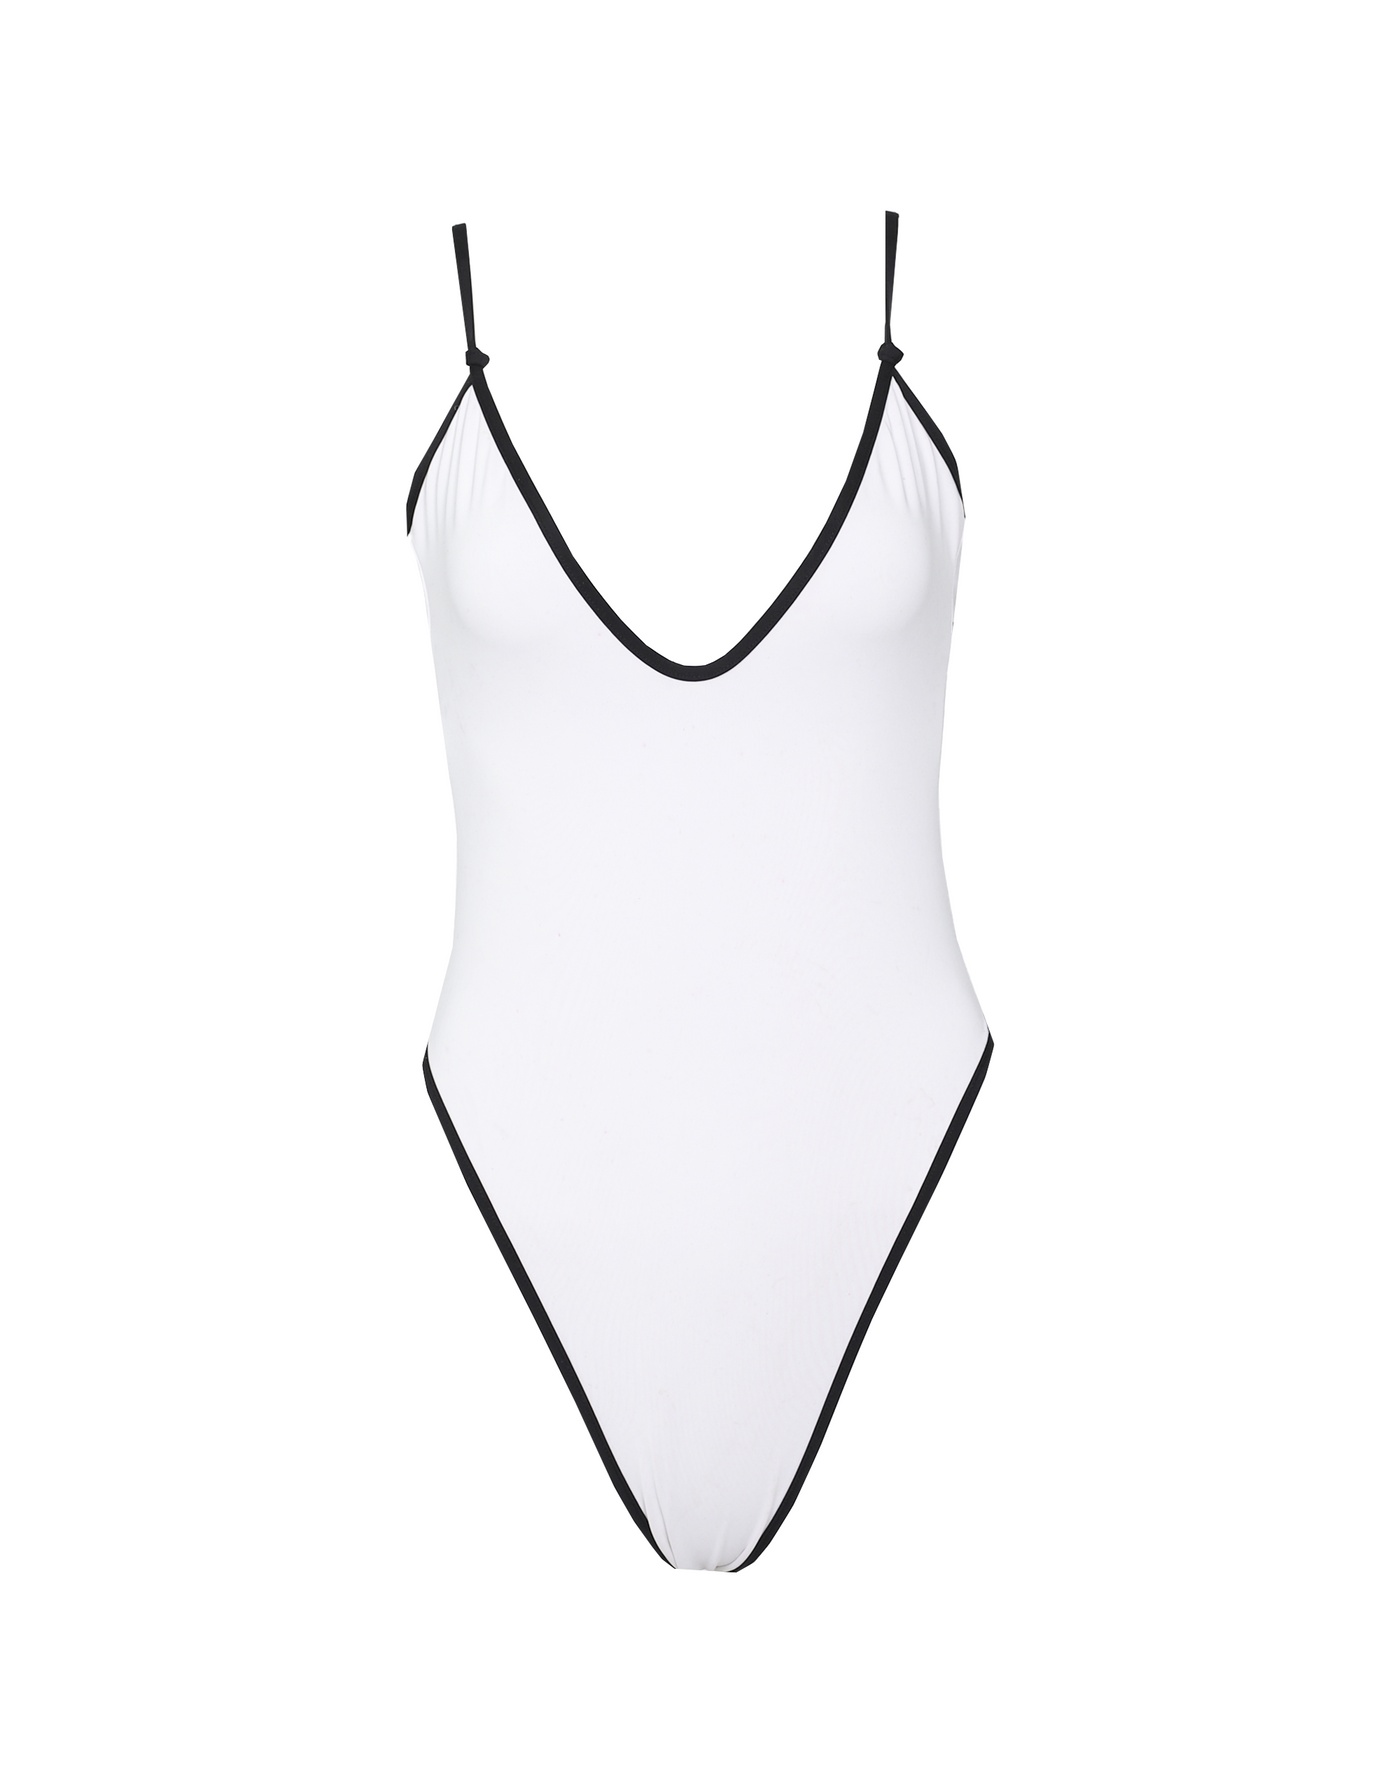 Sailing Close One Piece (Black/White) - Reversible Low Scooped Back Swim Suit - Women's Swim - Charcoal Clothing